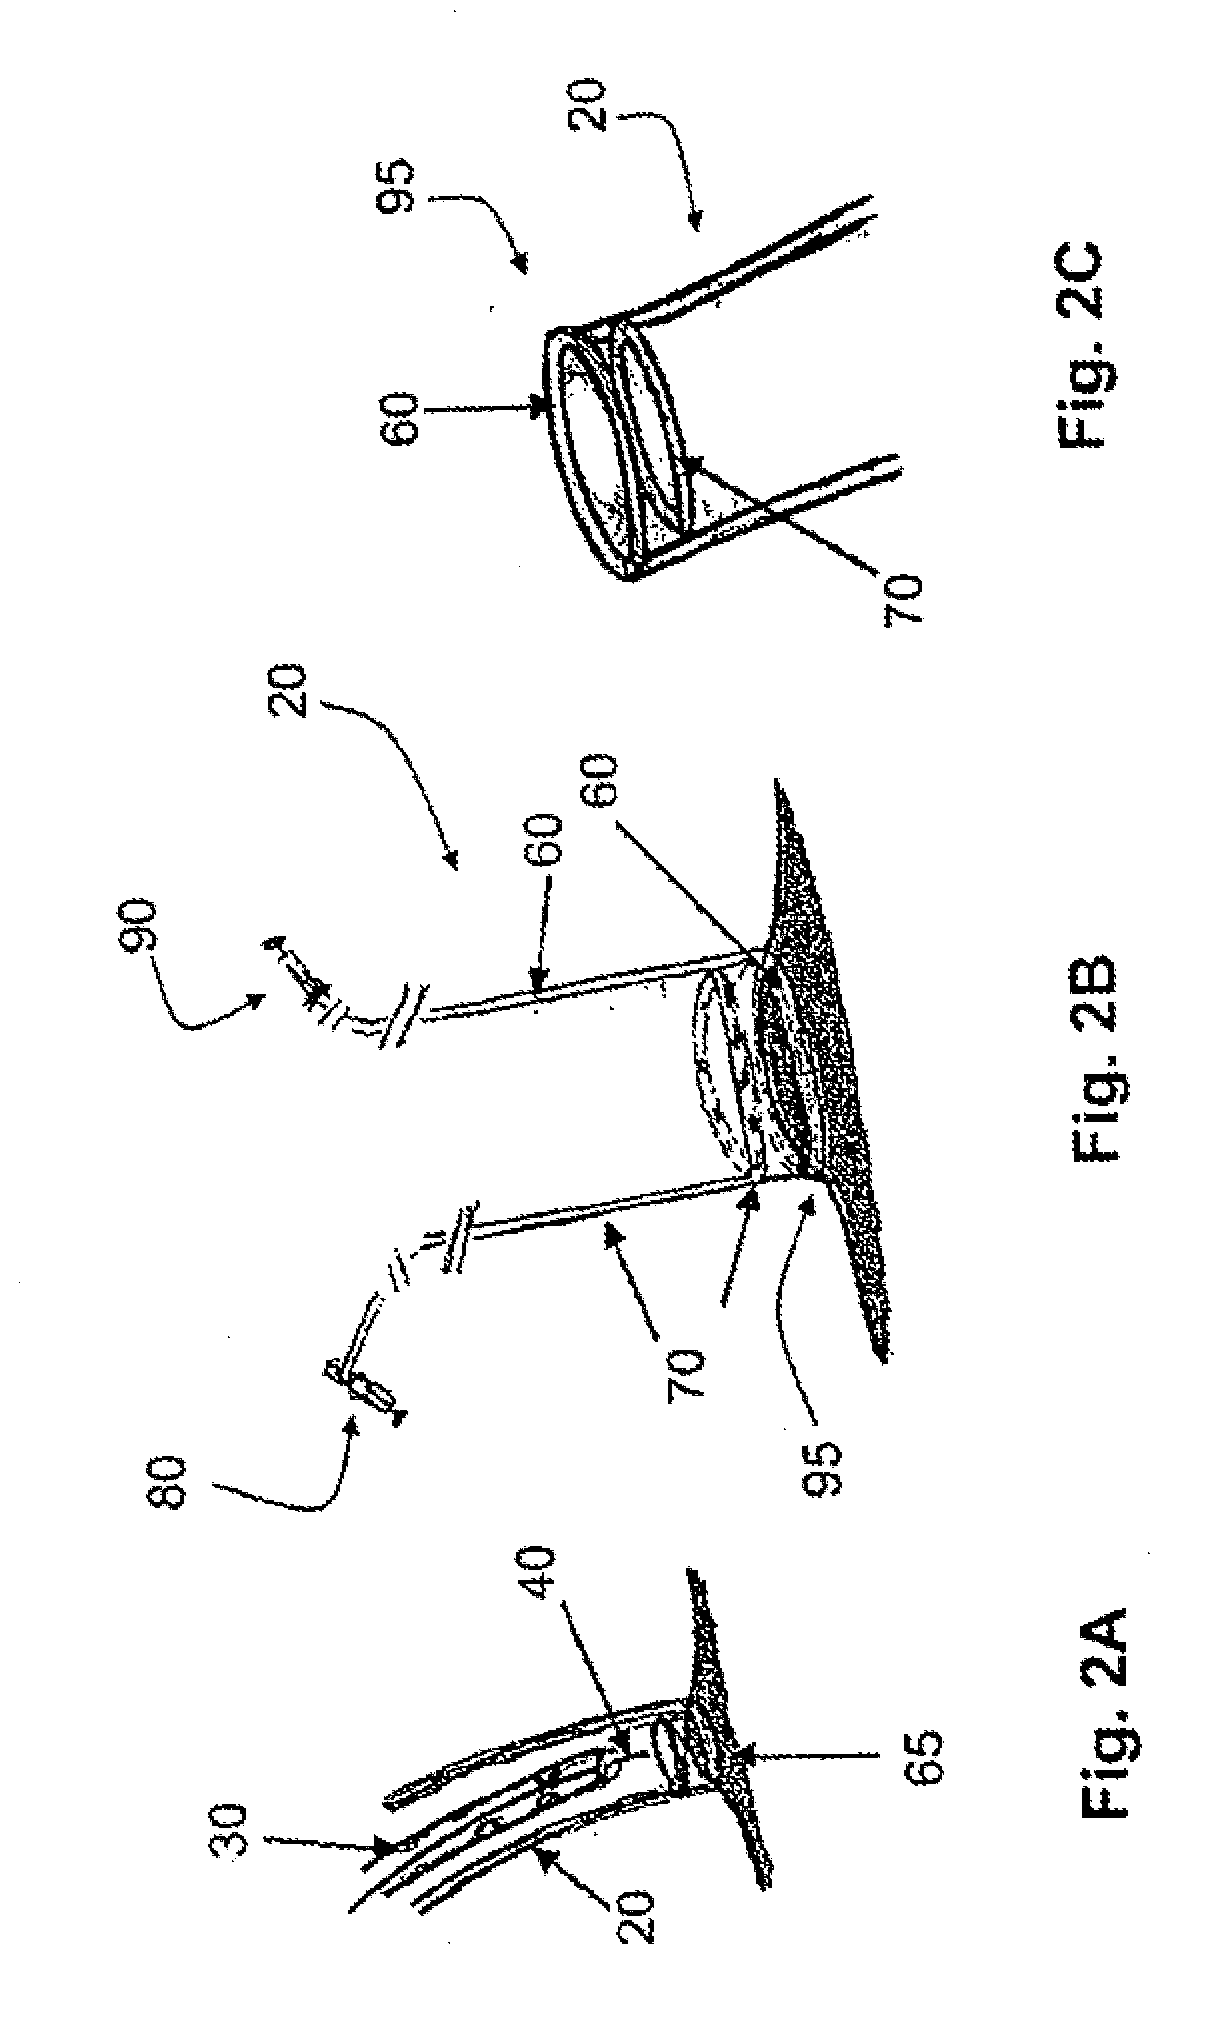 Steering engagement catheter devices, systems, and methods